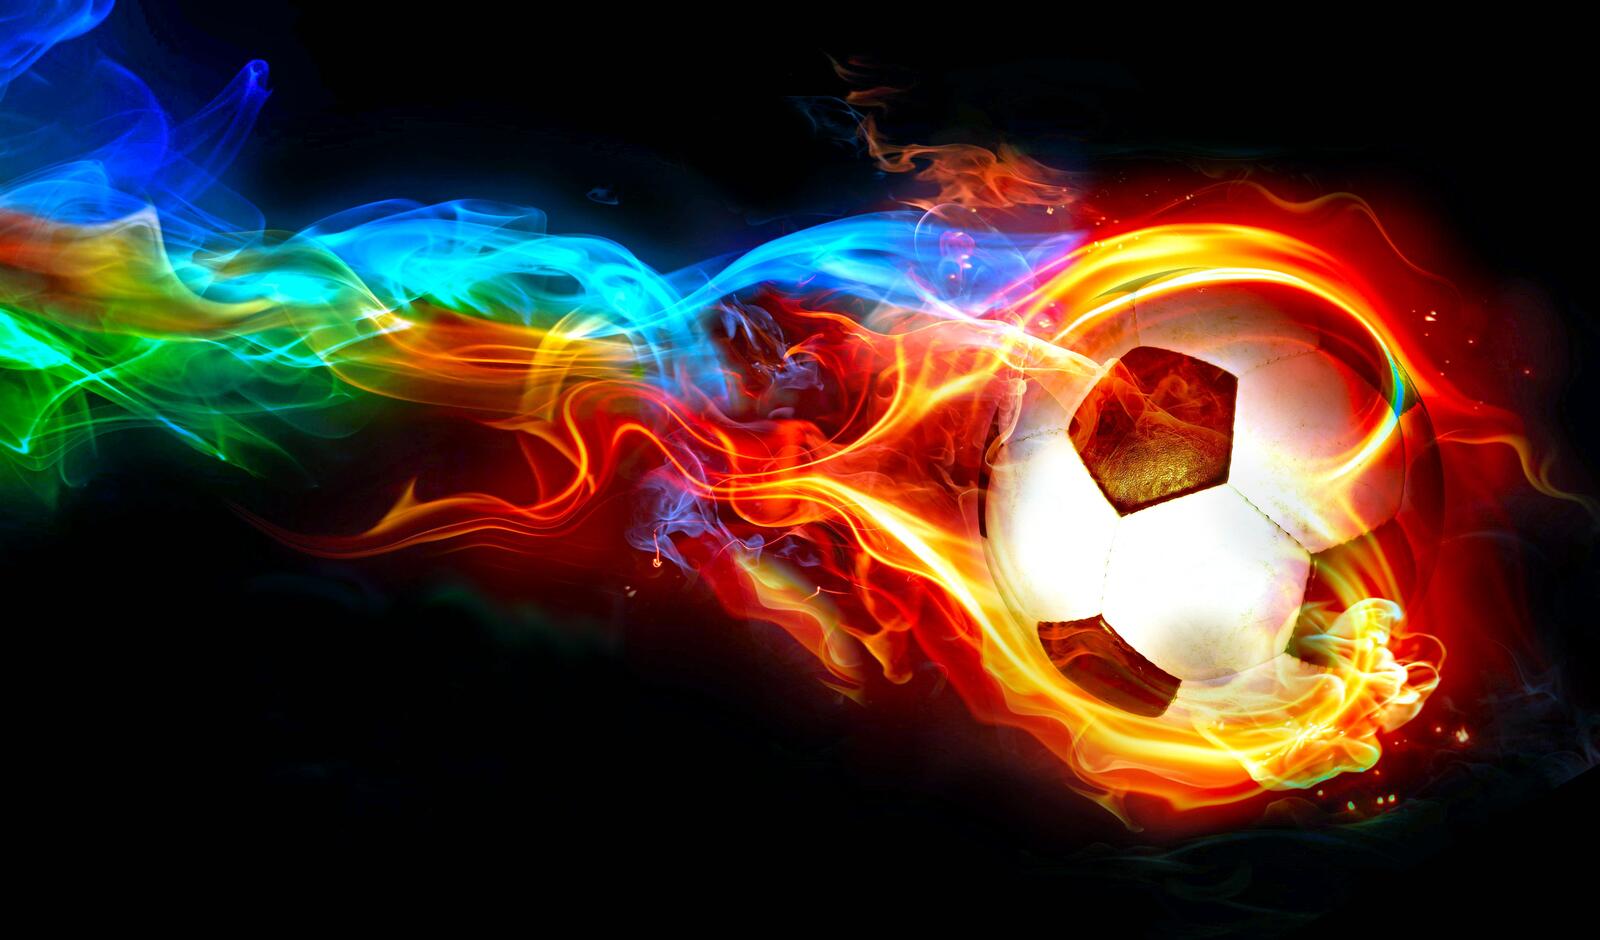 Free photo A soccer ball in a fiery abstraction